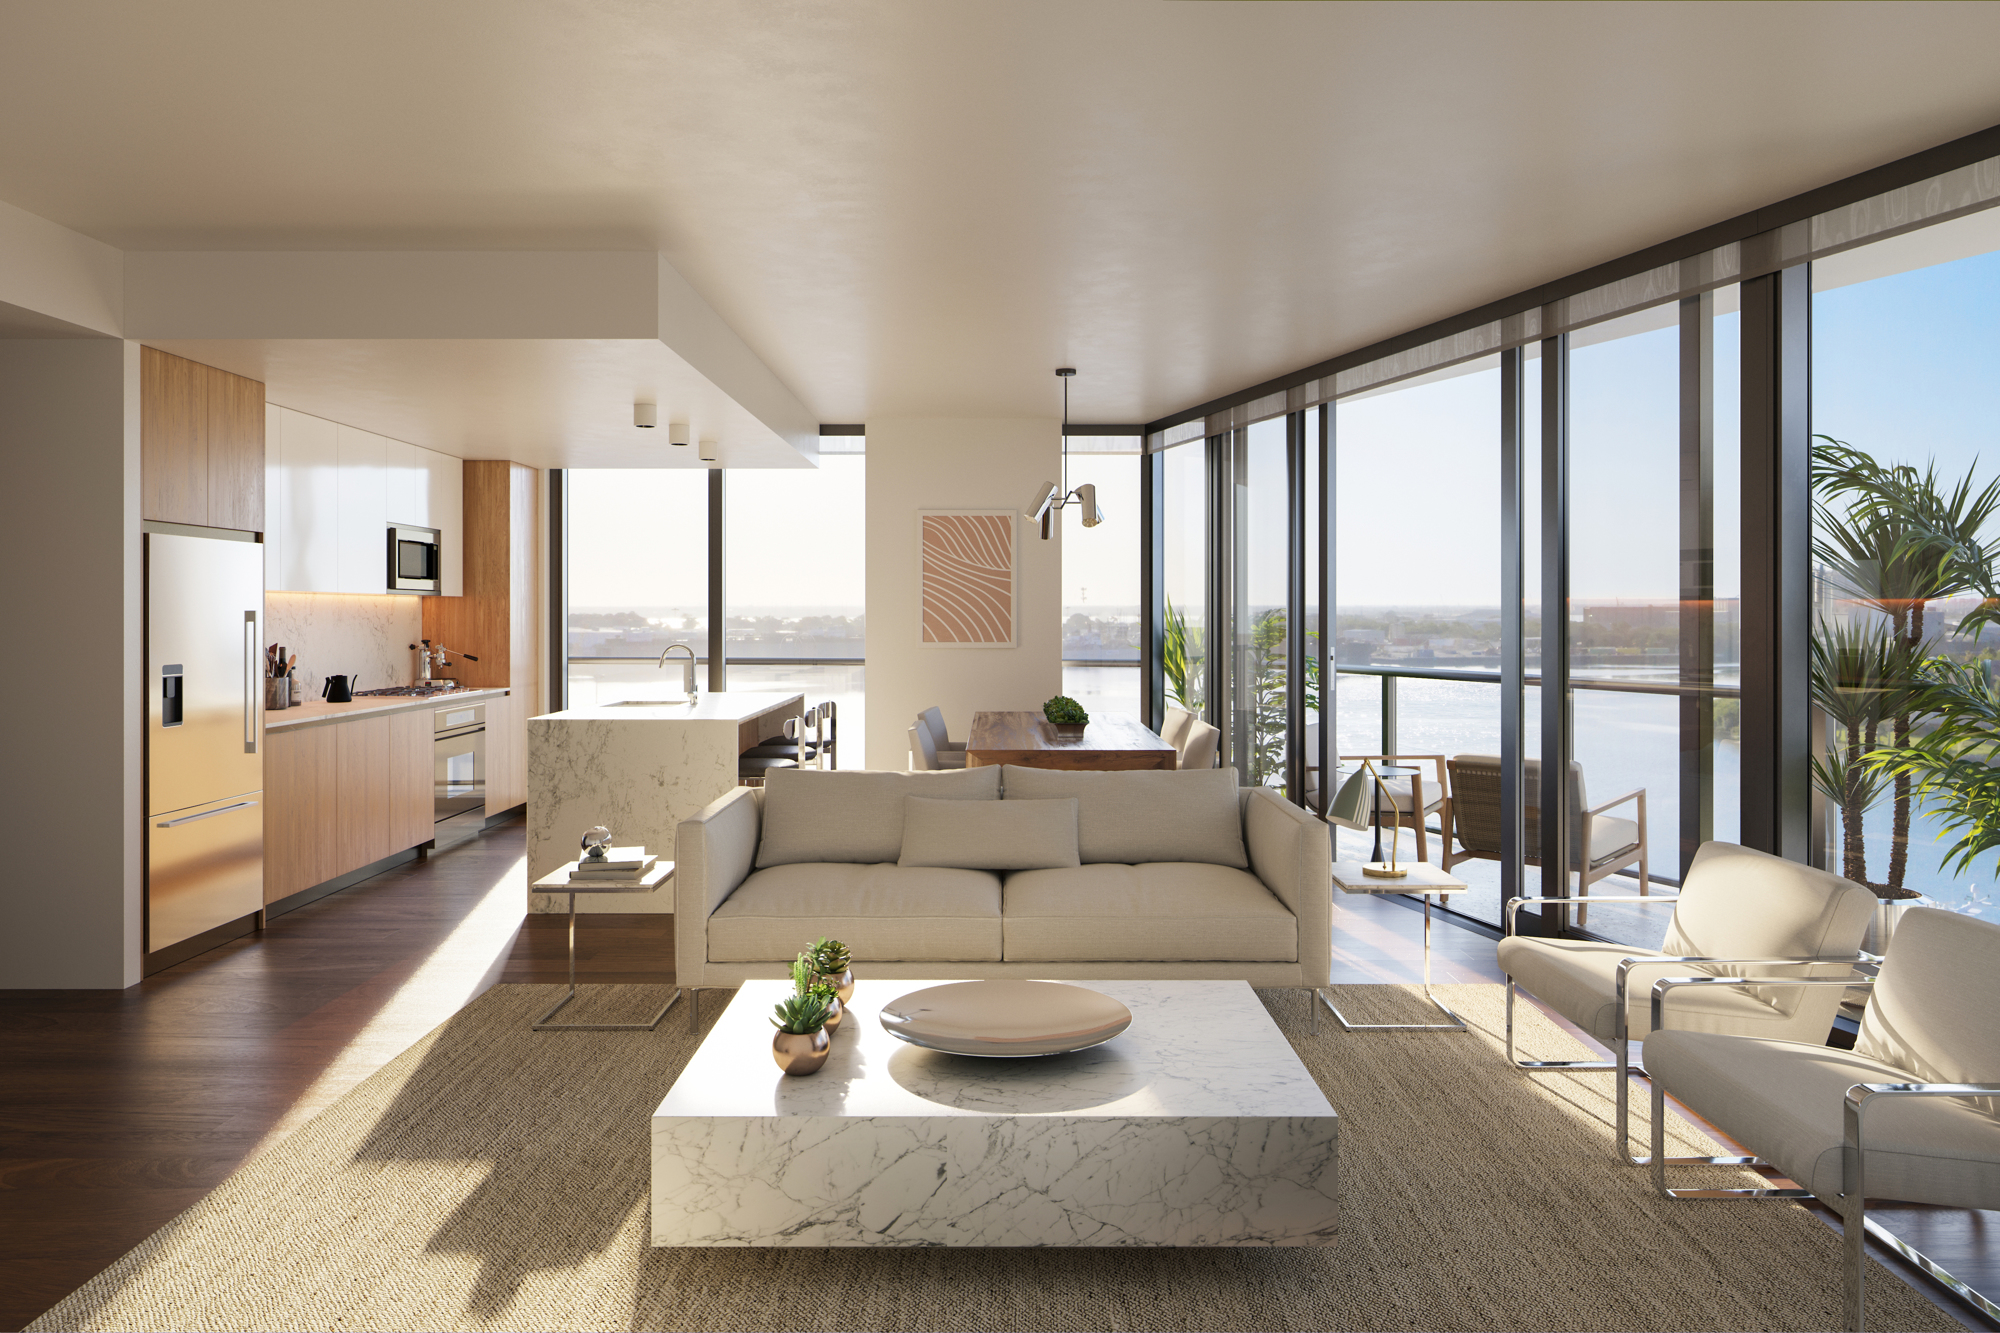 Courtesy. Pre-leasing for residences at Heron will begin in late 2020